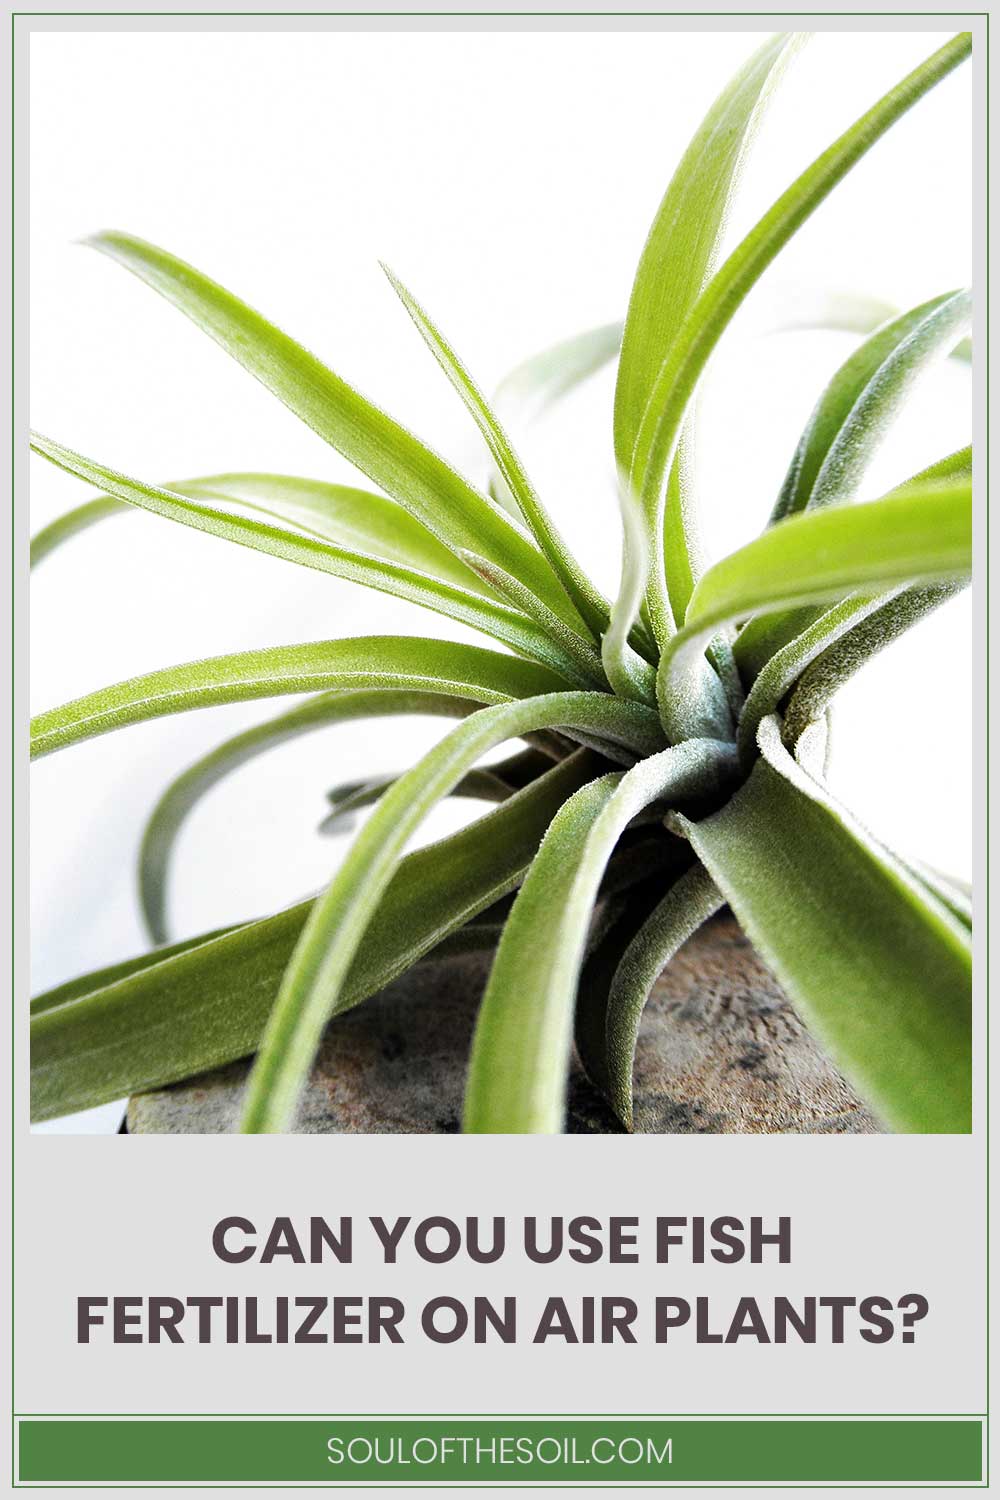 An Air plant - Can You Use Fish Fertilizer On them?